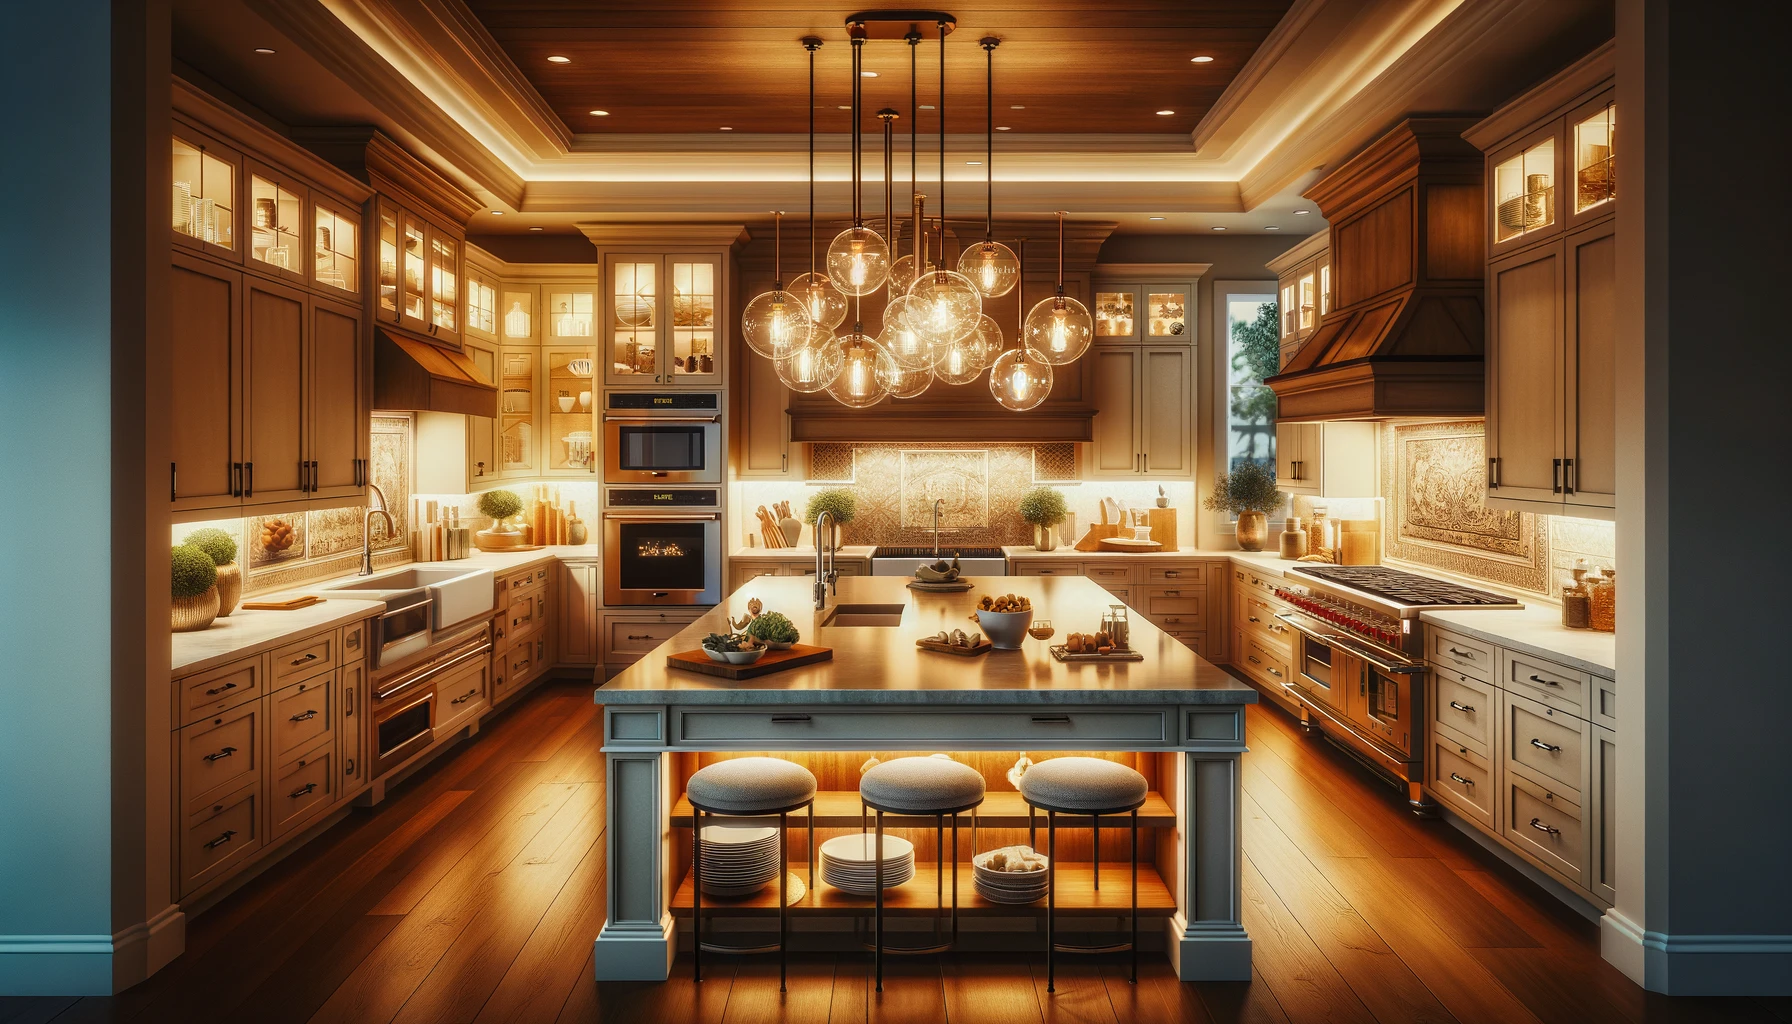 Visualize a Copperas Cove kitchen under the soft, warm glow of sophisticated lighting solutions.